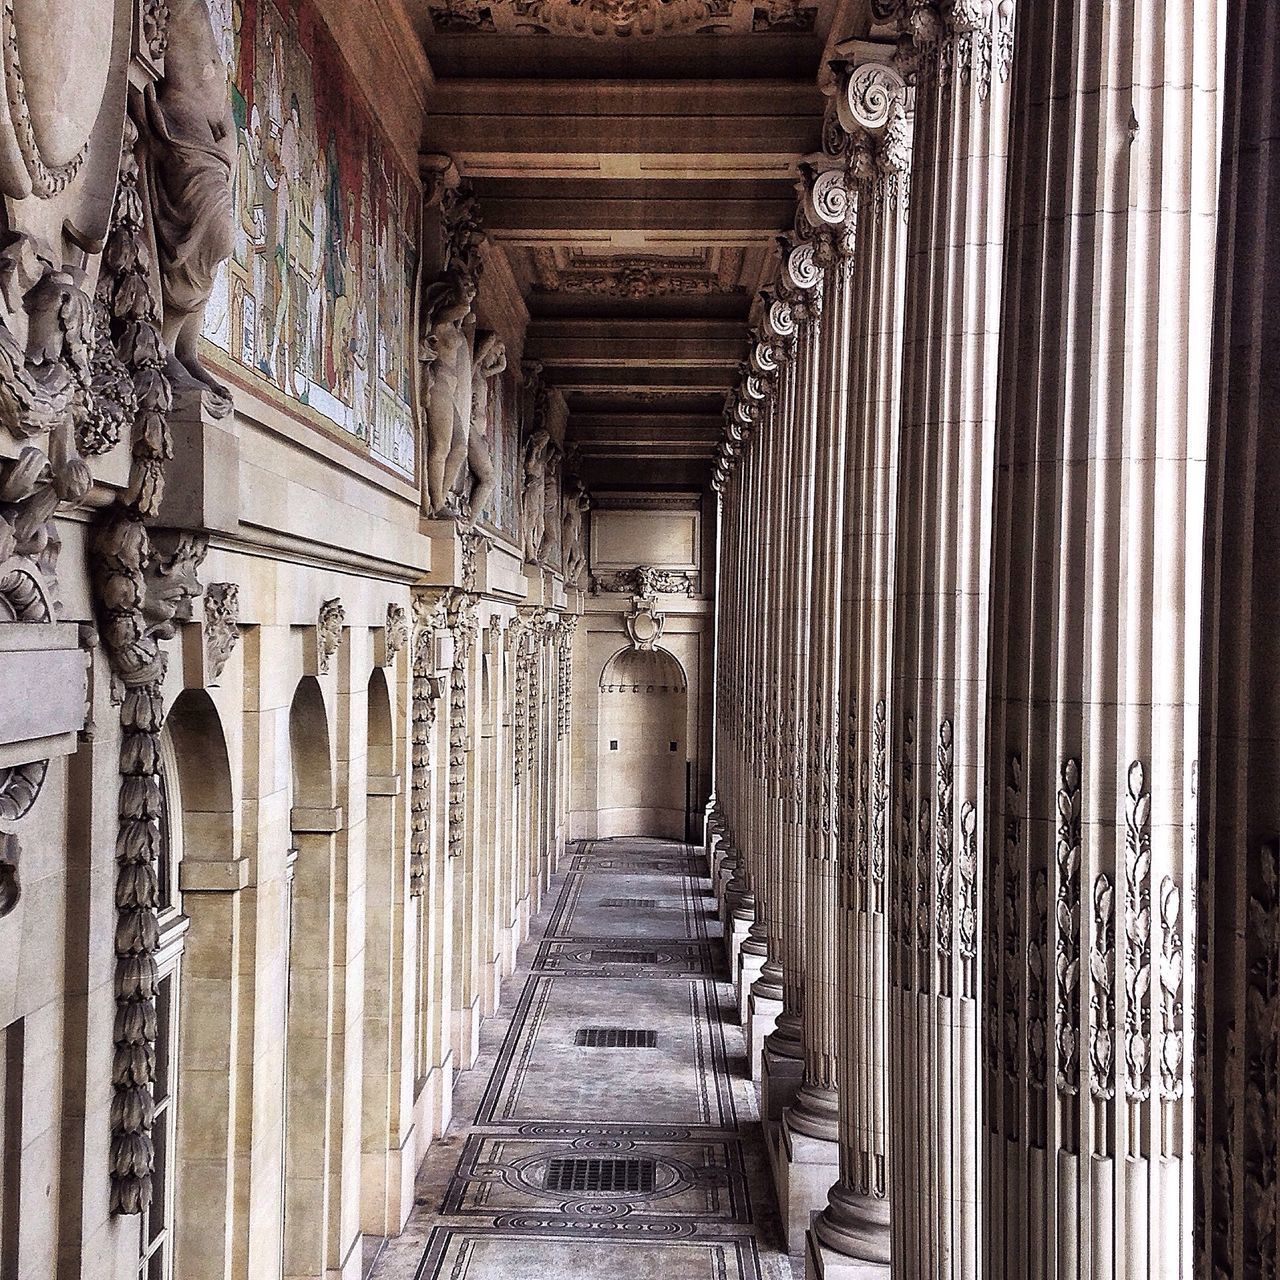 architecture, built structure, indoors, in a row, old, the way forward, corridor, architectural column, history, diminishing perspective, building, colonnade, door, building exterior, column, no people, repetition, day, the past, ceiling